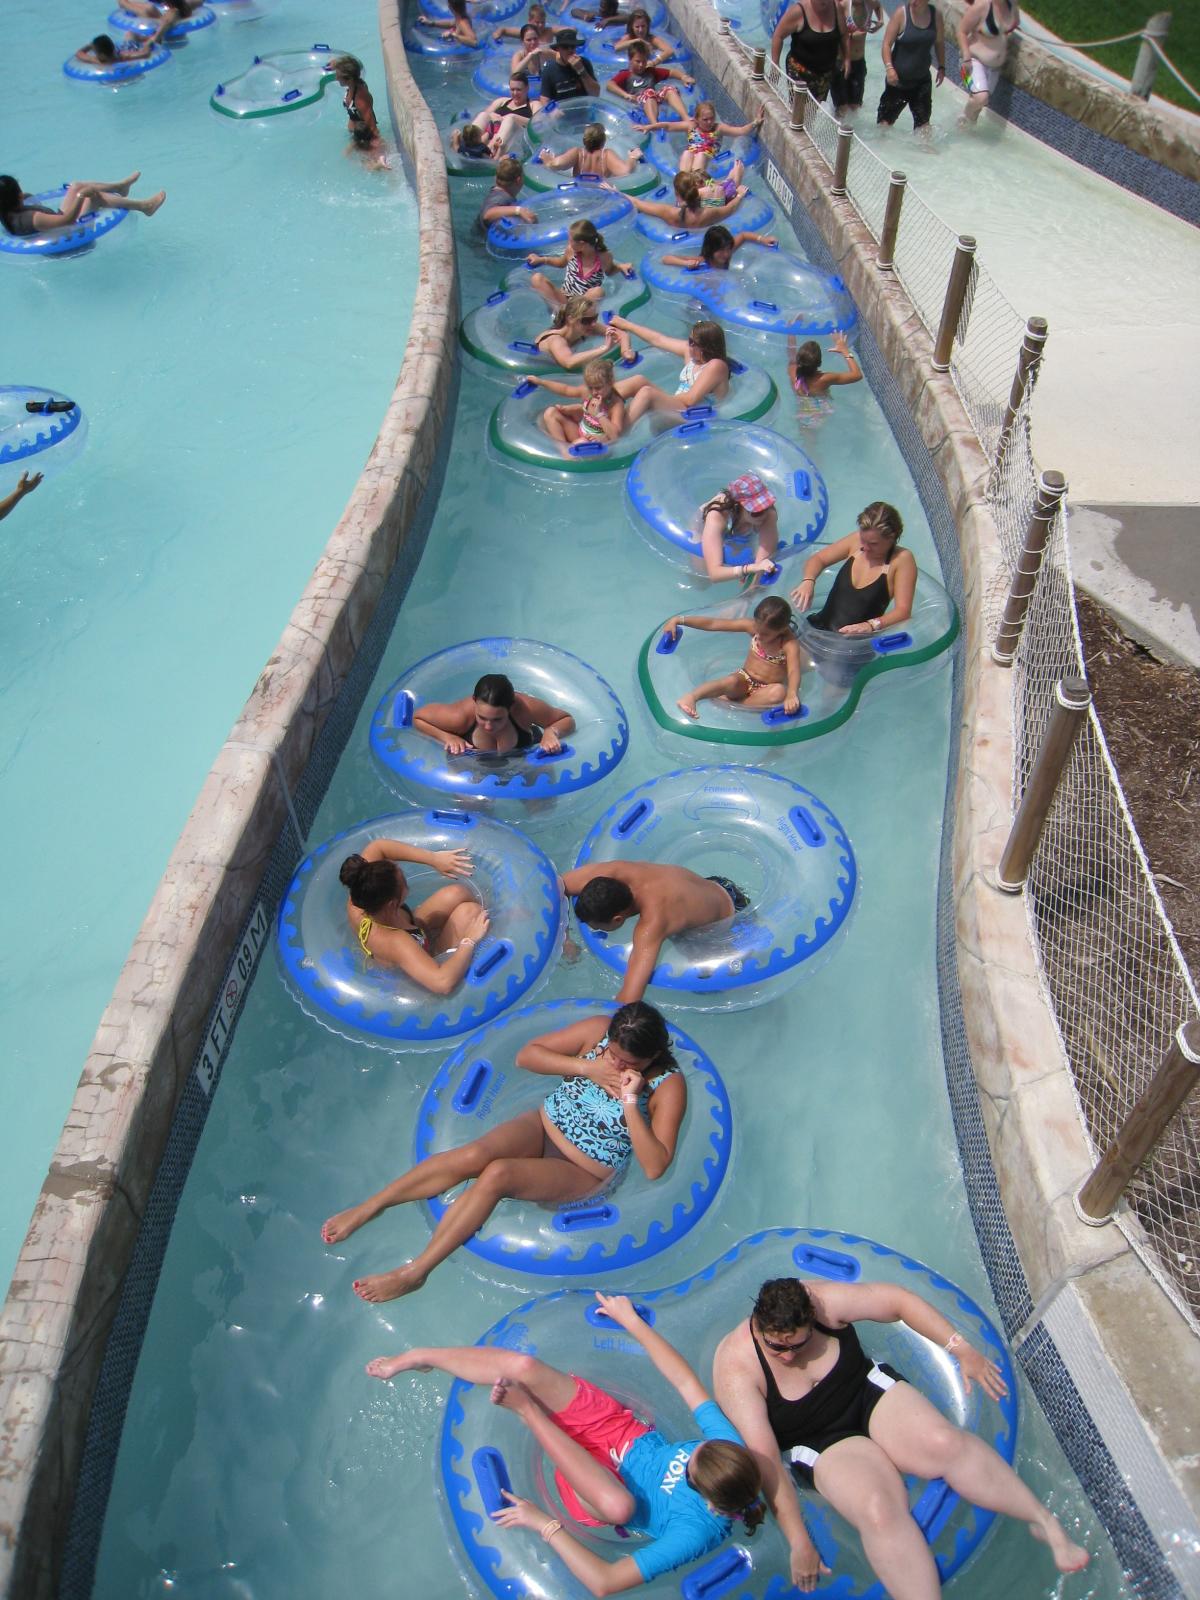 Tubers soak up some sun at the Schlitterbahn water park in Galveston, where nights are warmer than ever — literally.